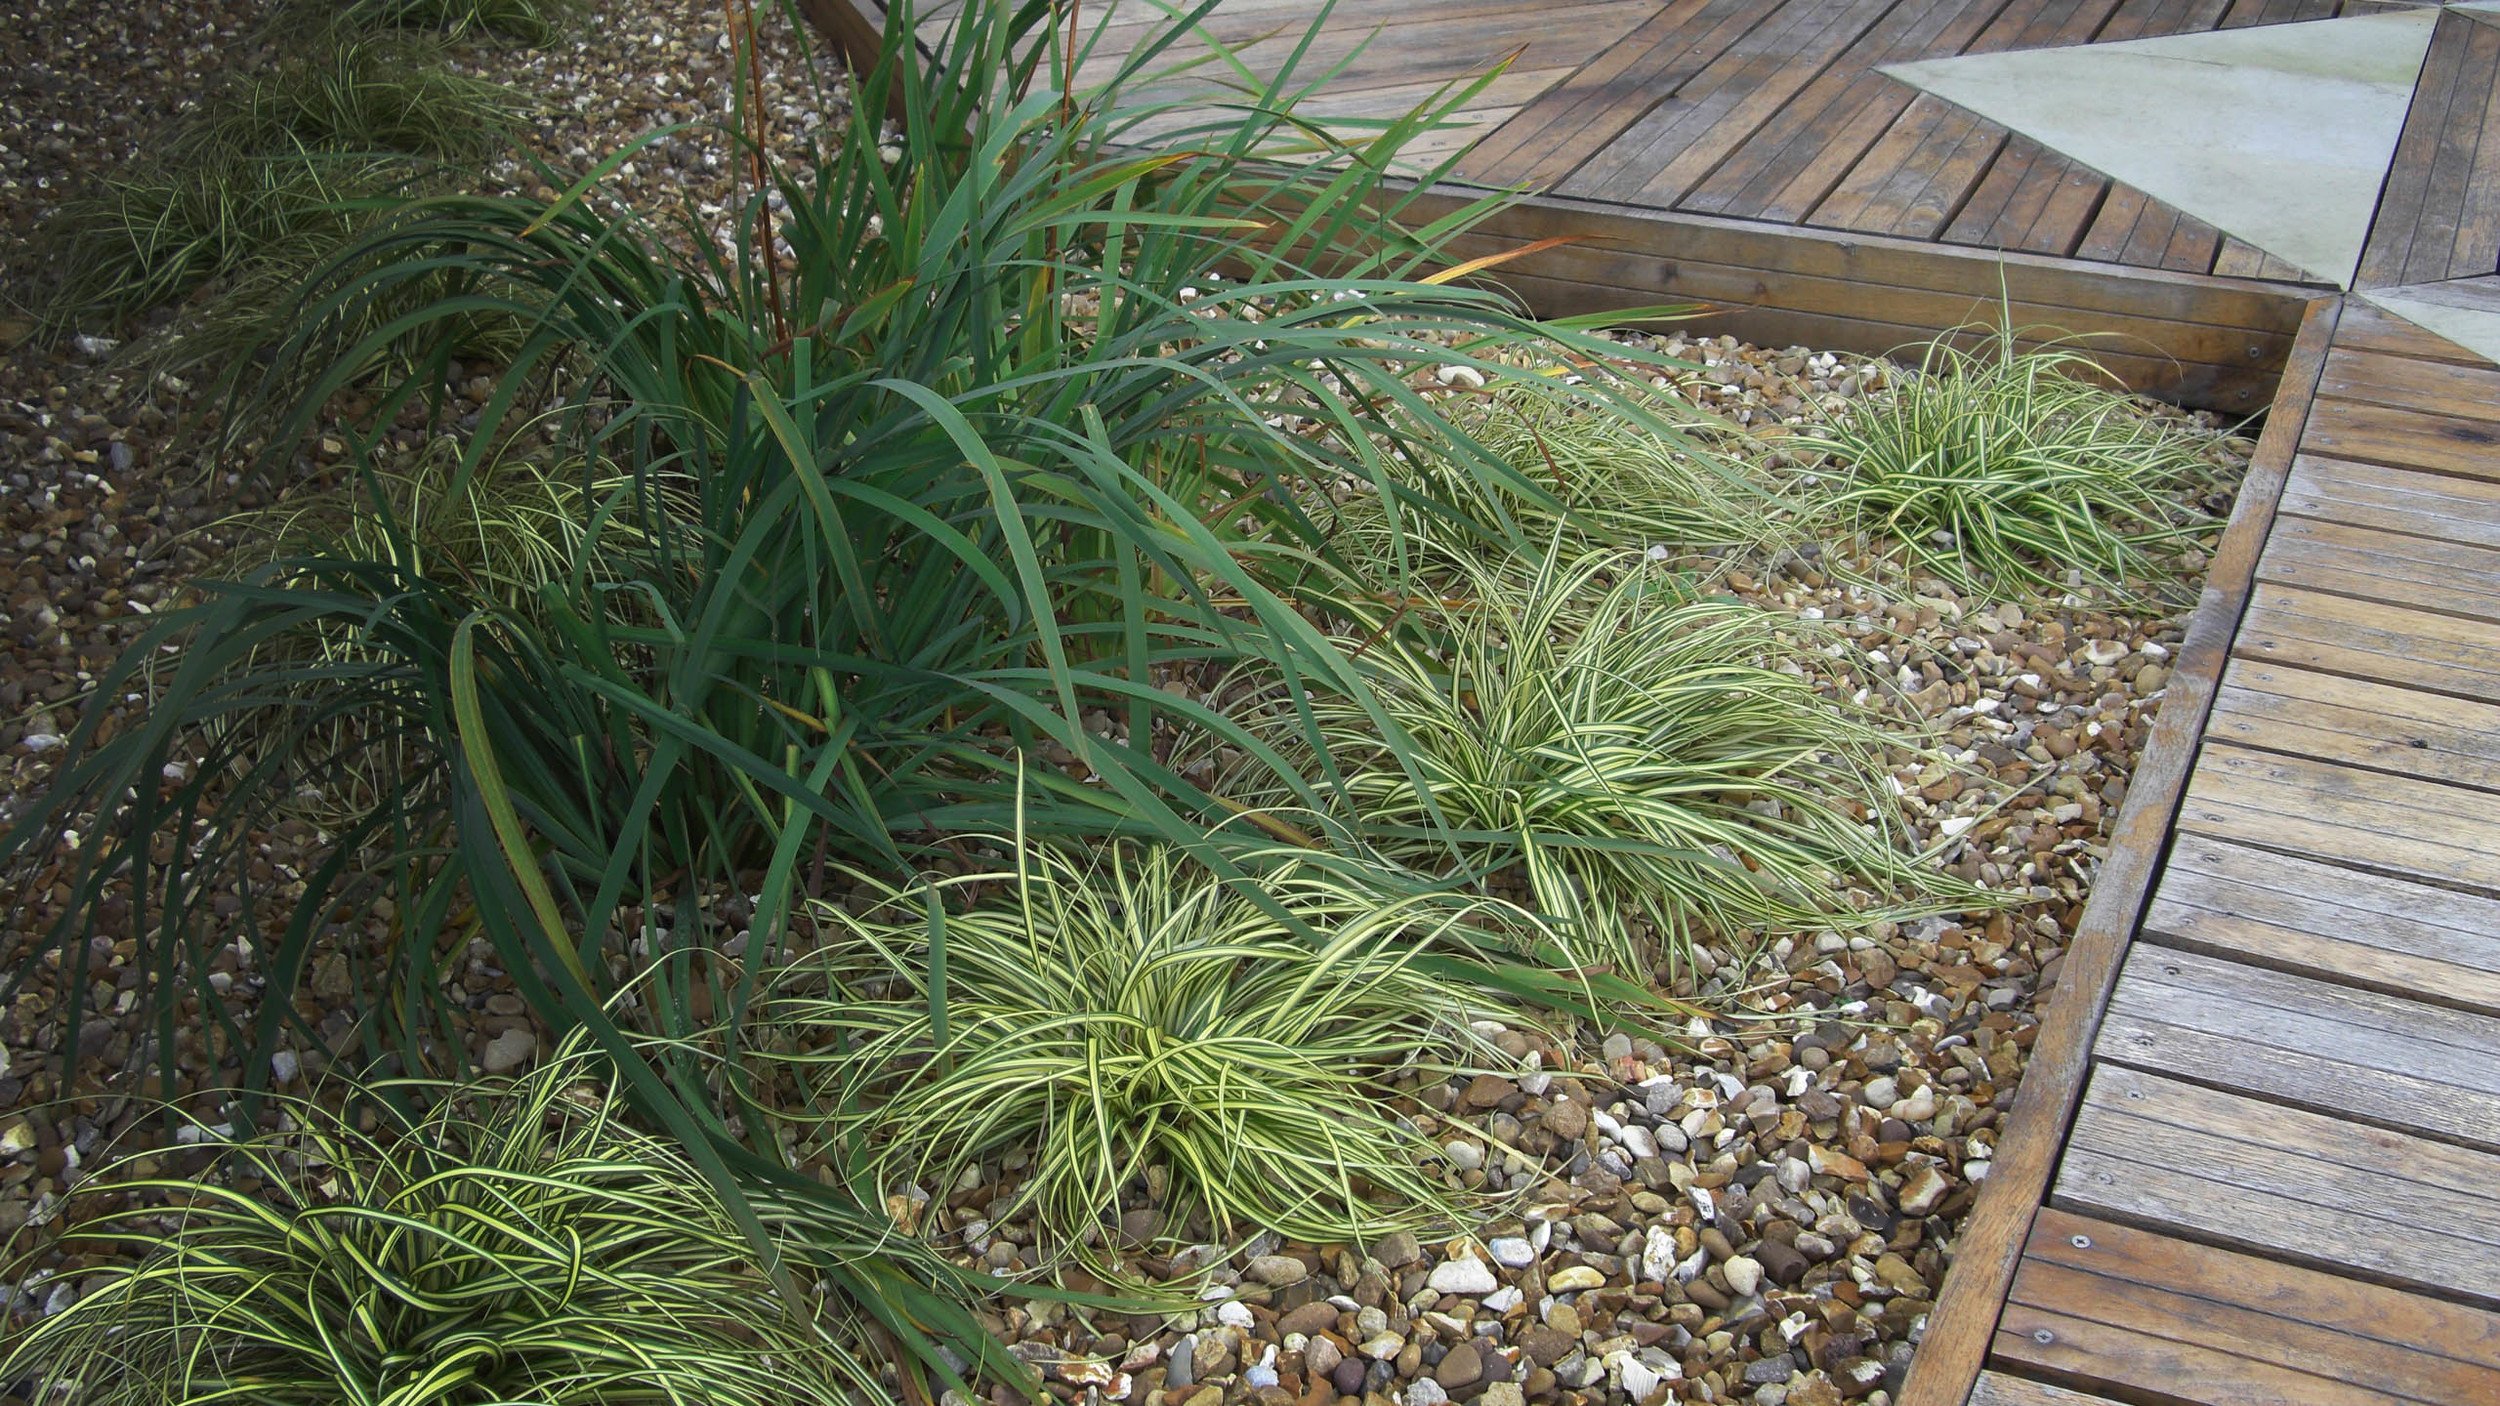 Grasses in gravel with oak decking